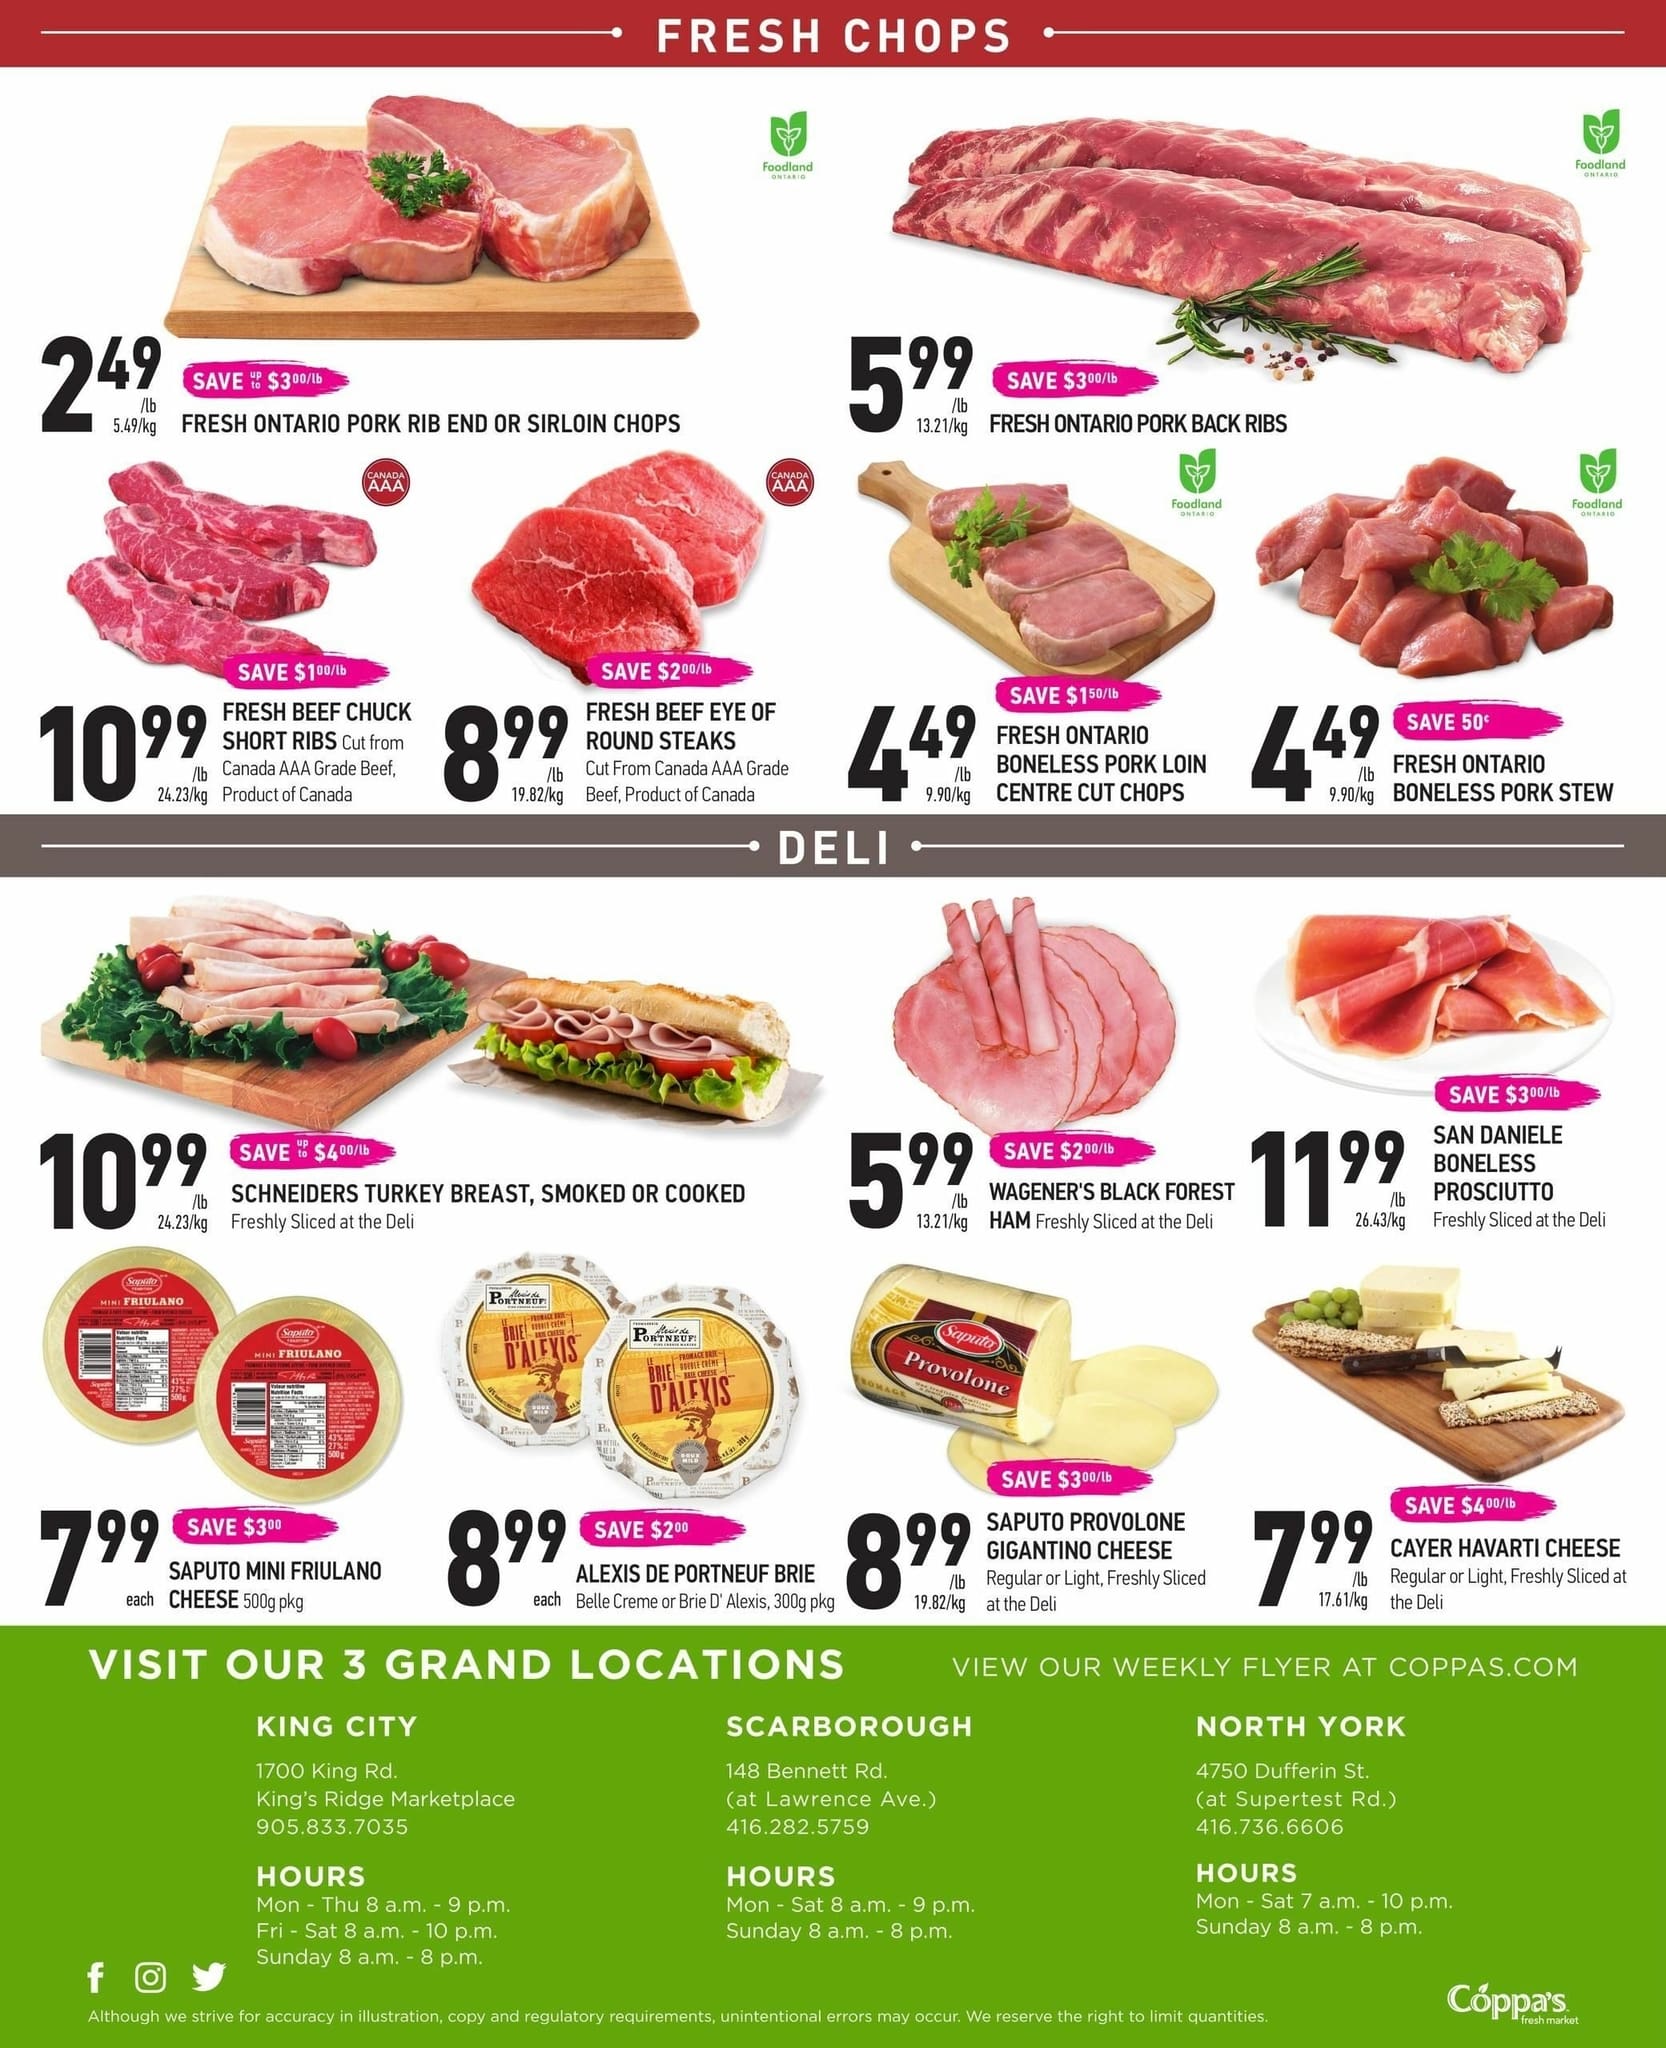 Coppa's Fresh Market - Weekly Flyer Specials - Page 6